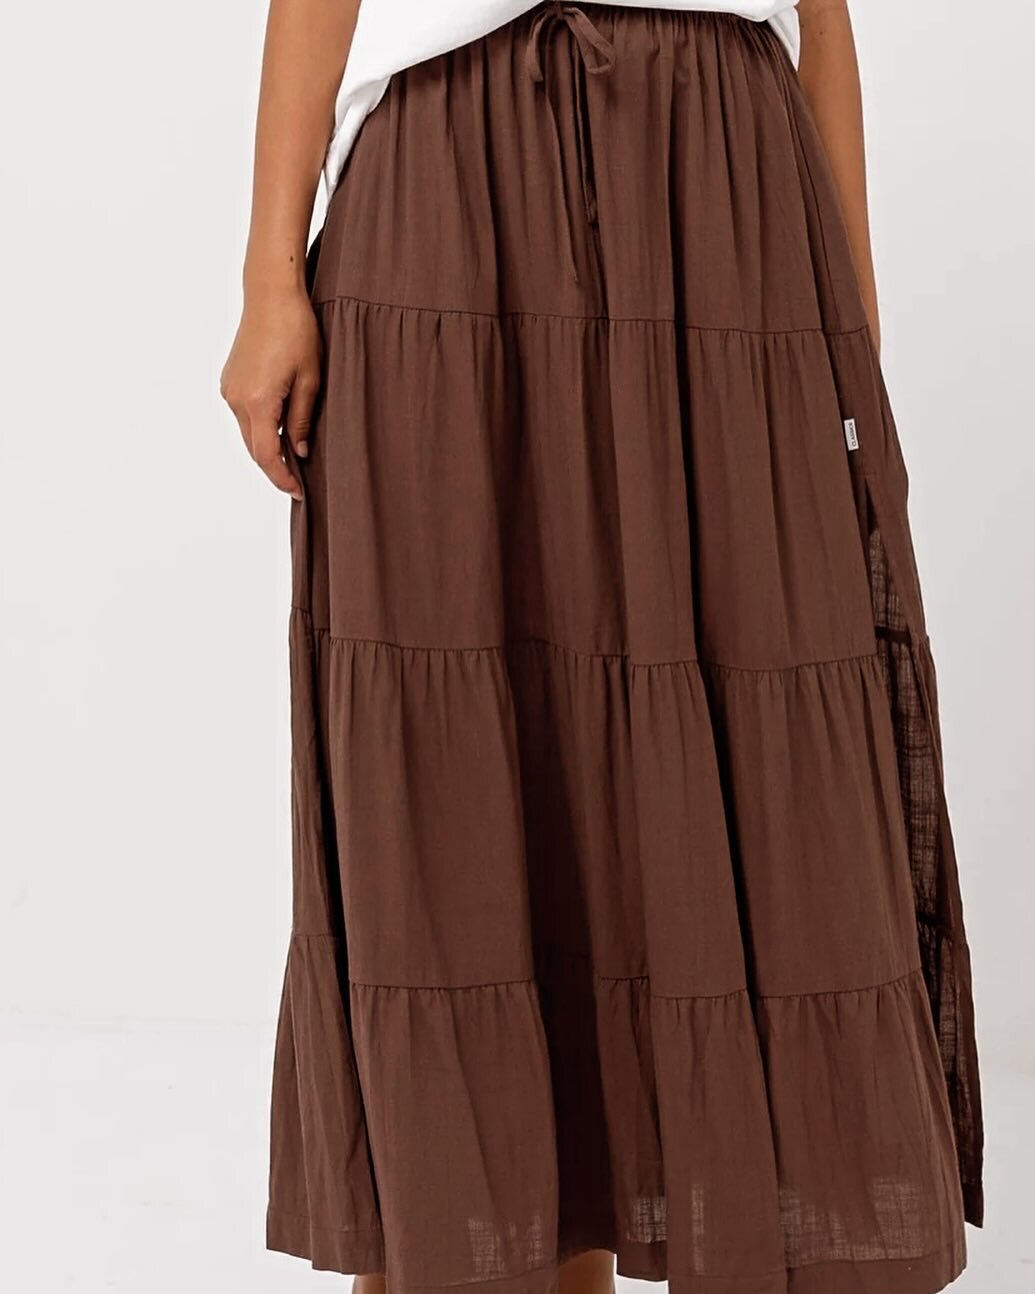 Brown happens to be one of my favourite colours to wear. Looking forward to the summer sun, swimming in the ocean, wearing sandals and this flowing skirt.